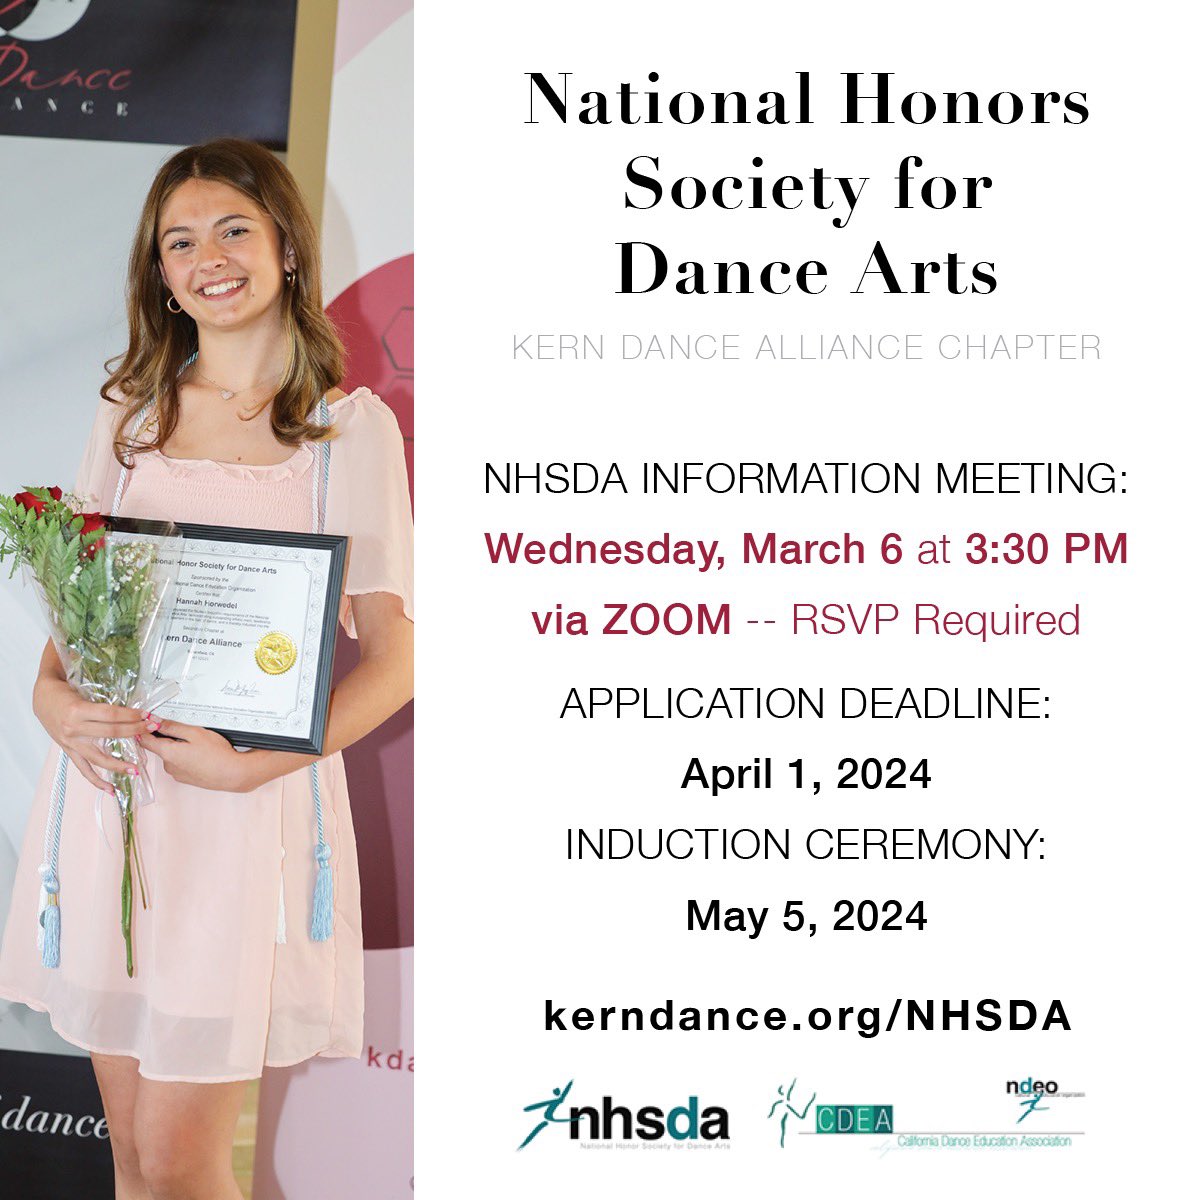 Calling all Kern County performing arts high school students - you are invited to apply to become a National Honors Society for Dance Arts™ (NHSDA) inductee! Join the NHSDA Information Meeting via Zoom: Wednesday, March 6 @ 3:30 PM to learn more! 🔗 kerndance.org/NHSDA